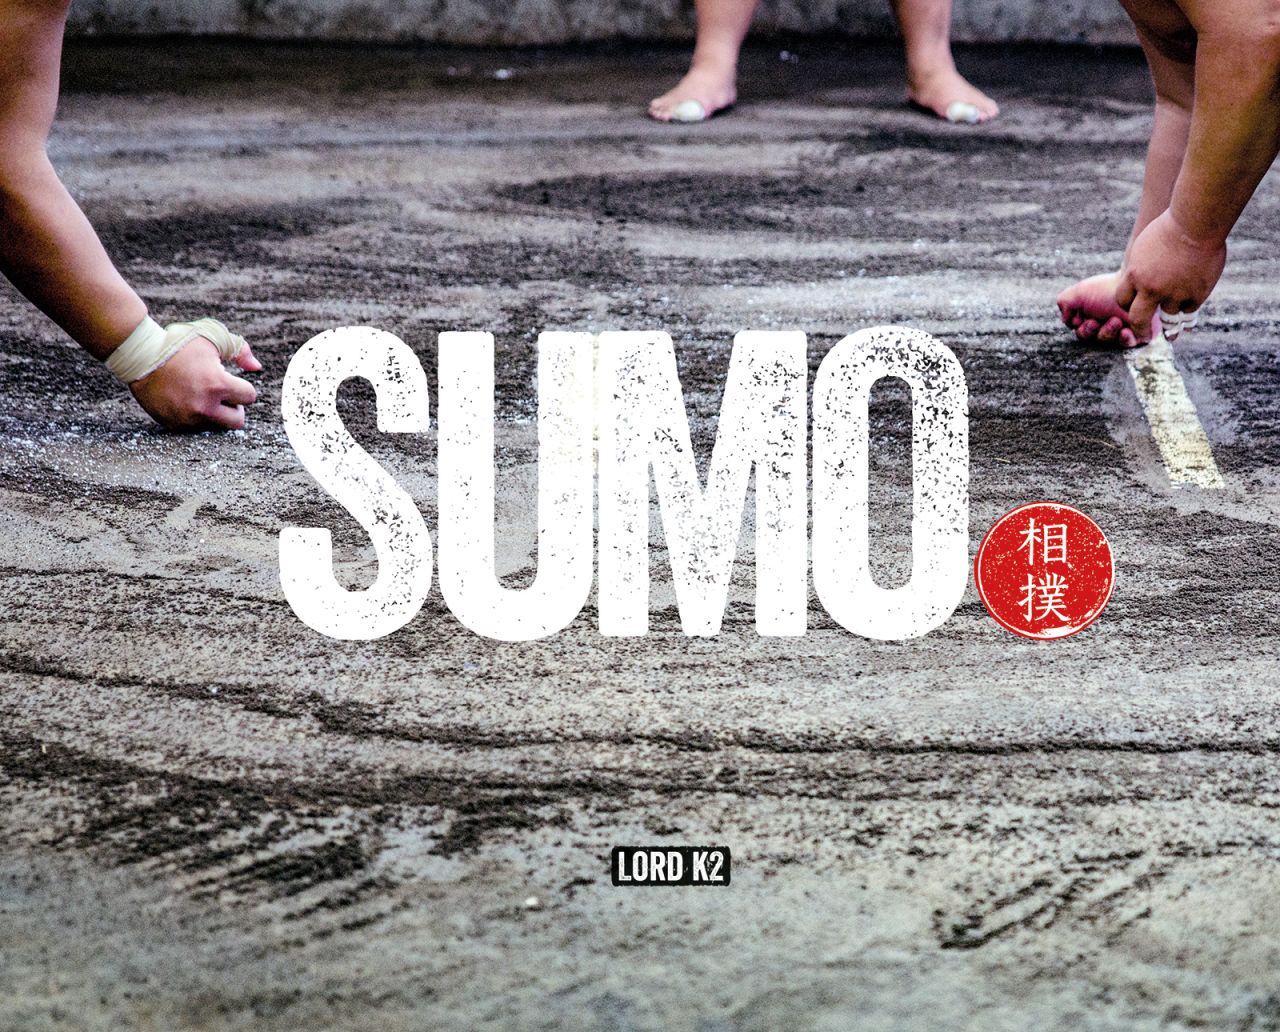 "<a href="https://www.ammonitepress.com/photography/sumo/" target="_blank" target="_blank">Sumo</a>," published by Ammonite Press, is available now in the UK and globally from March 2023.